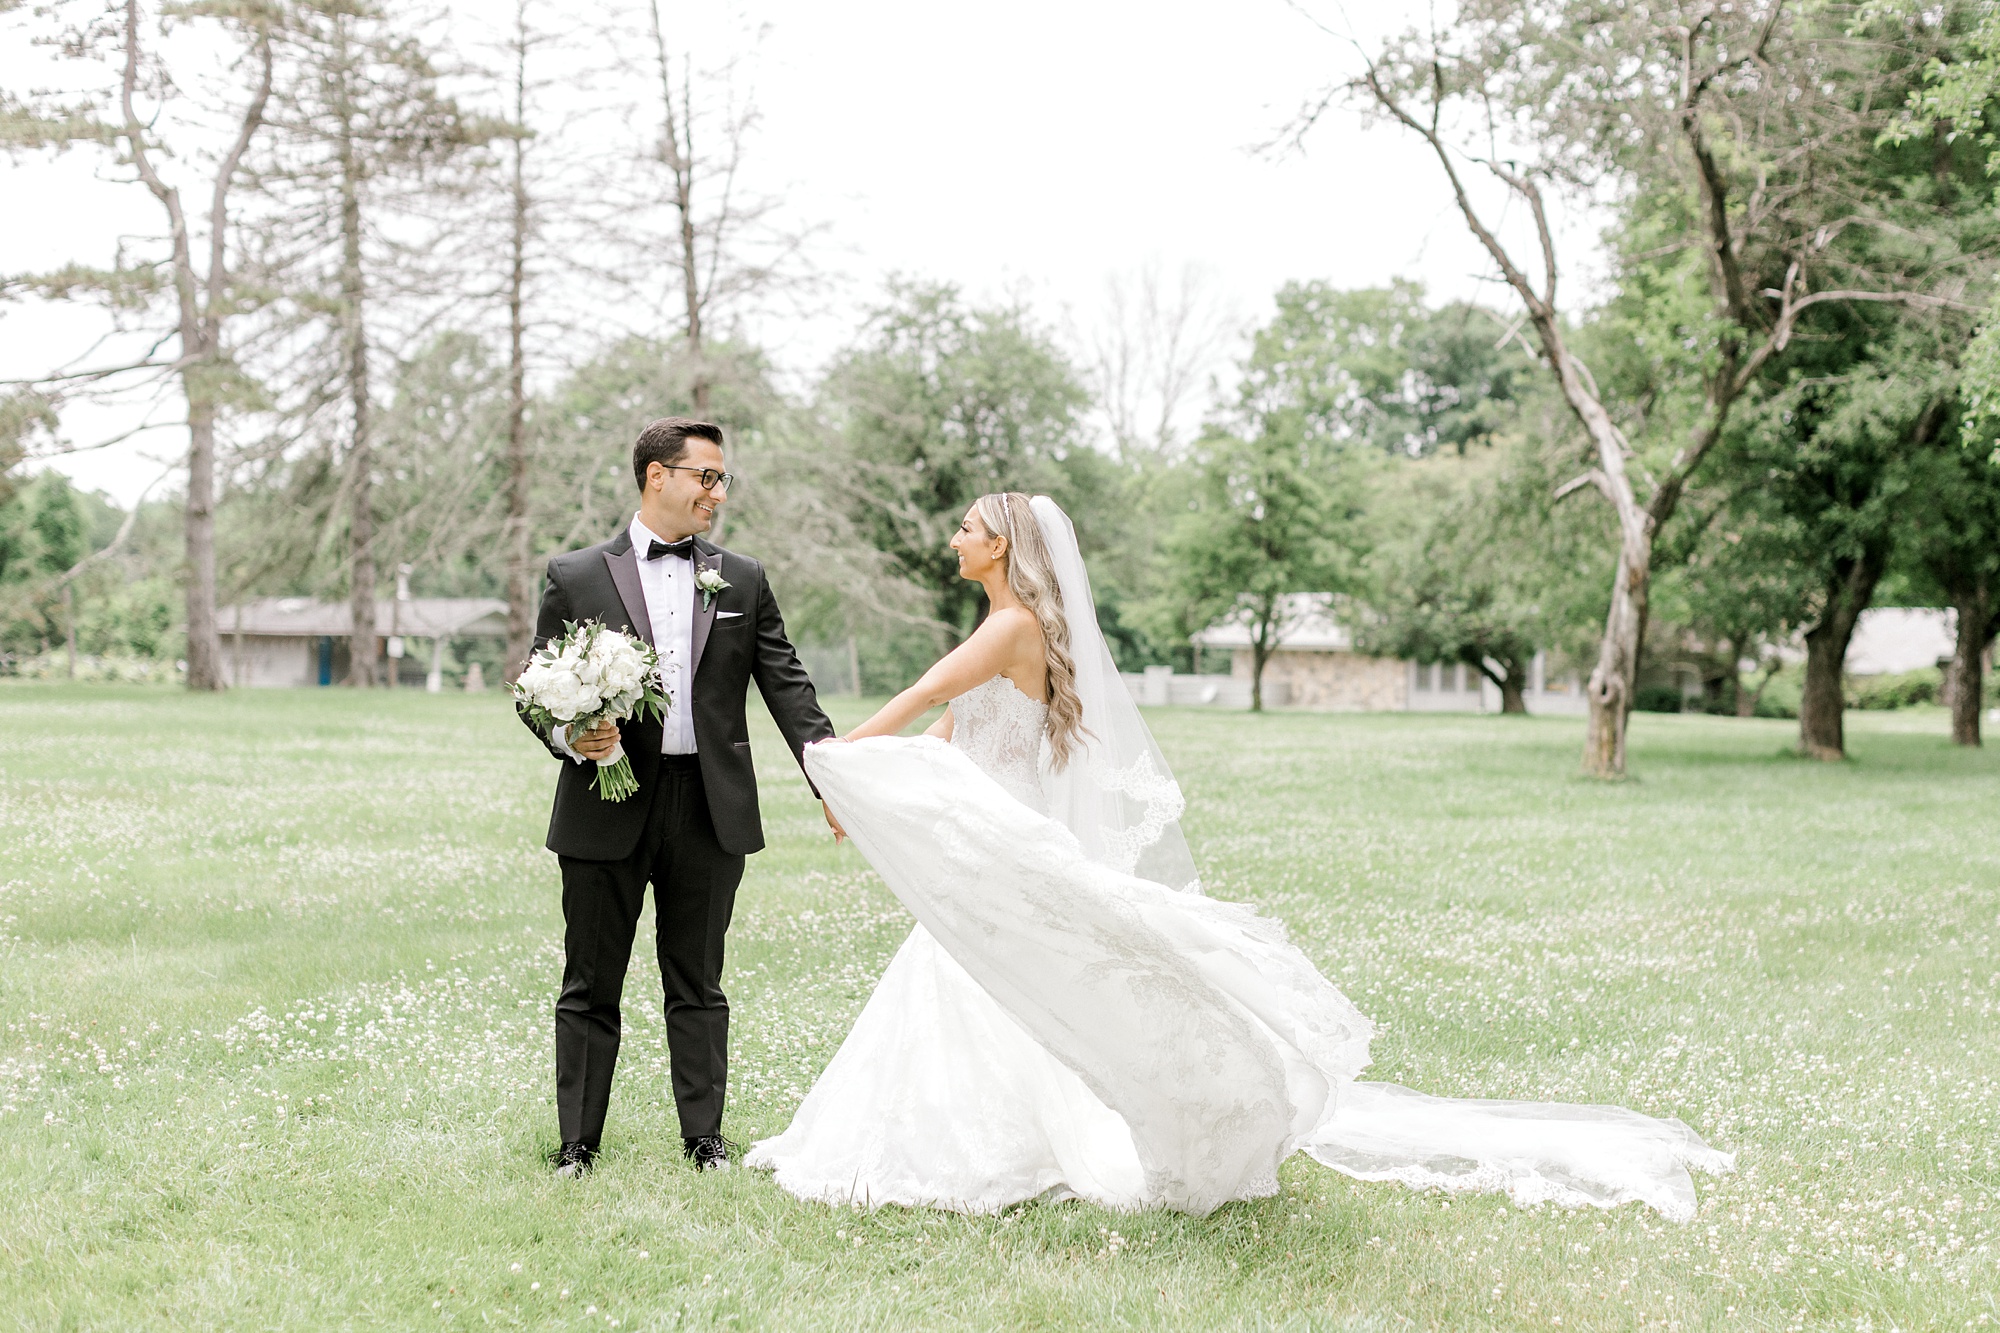 groom walks with bride on lawn while she twirls skirt of wedding gown